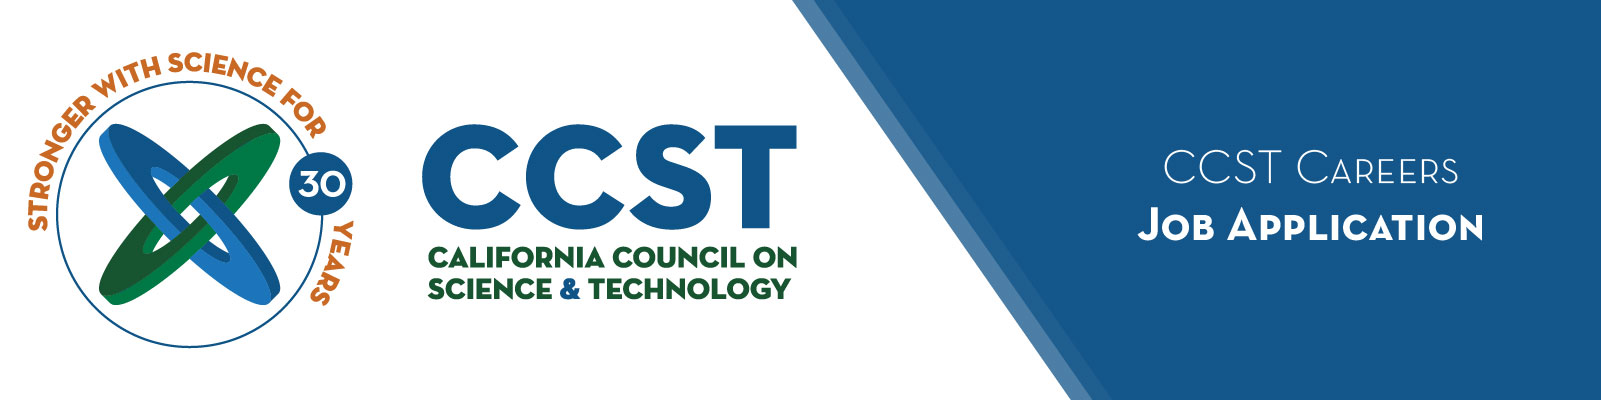 Banner with CCST logo that says CCST Careers Job Application